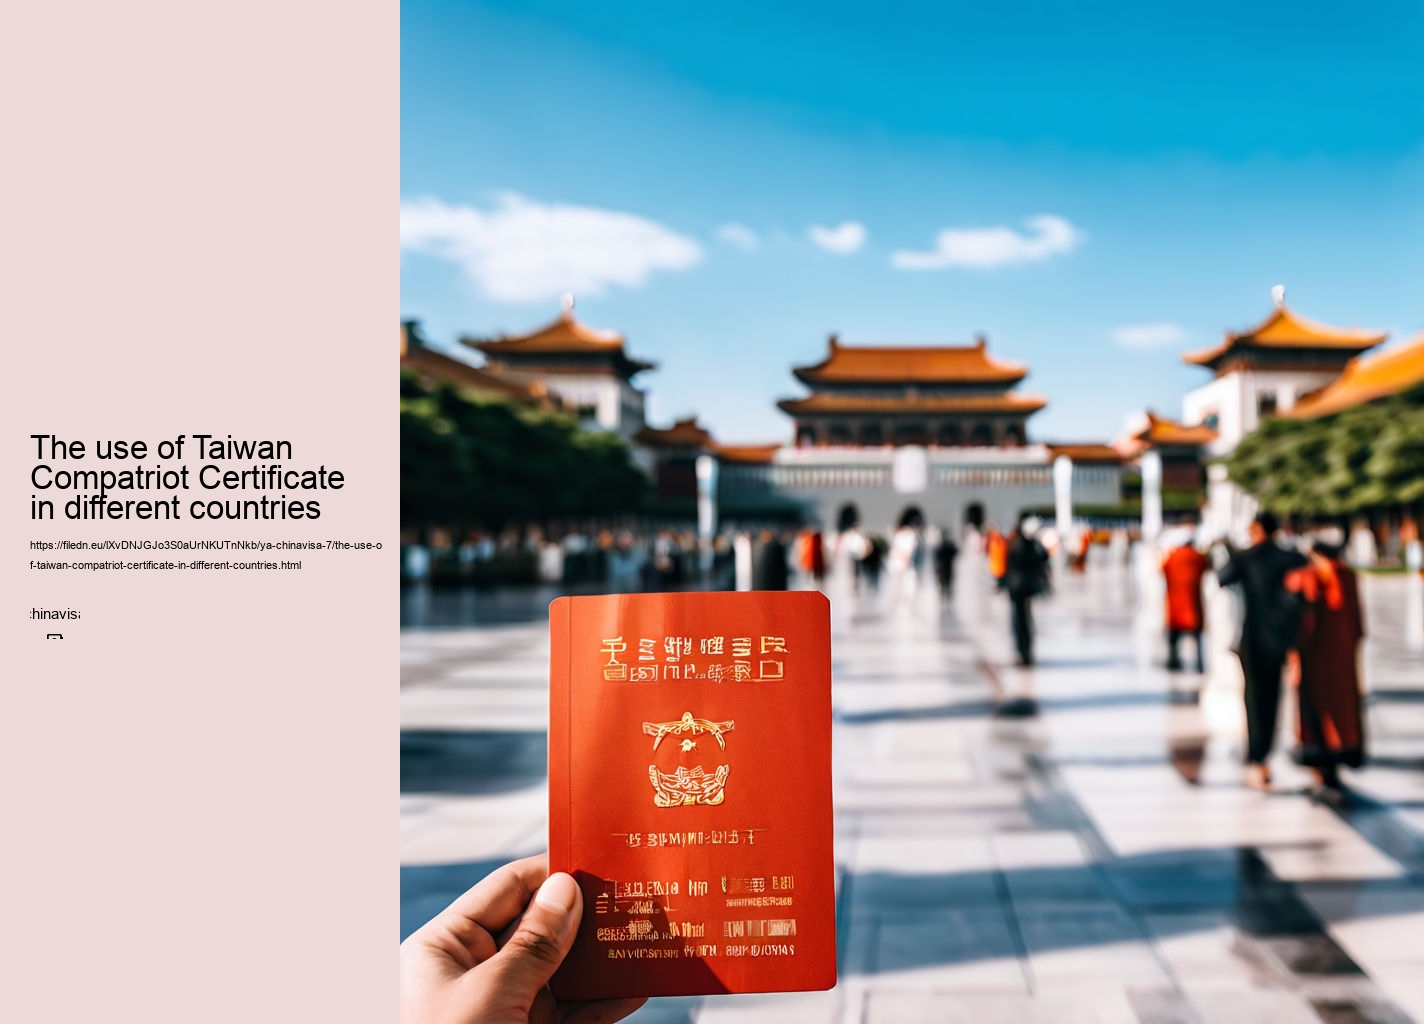 The use of Taiwan Compatriot Certificate in different countries